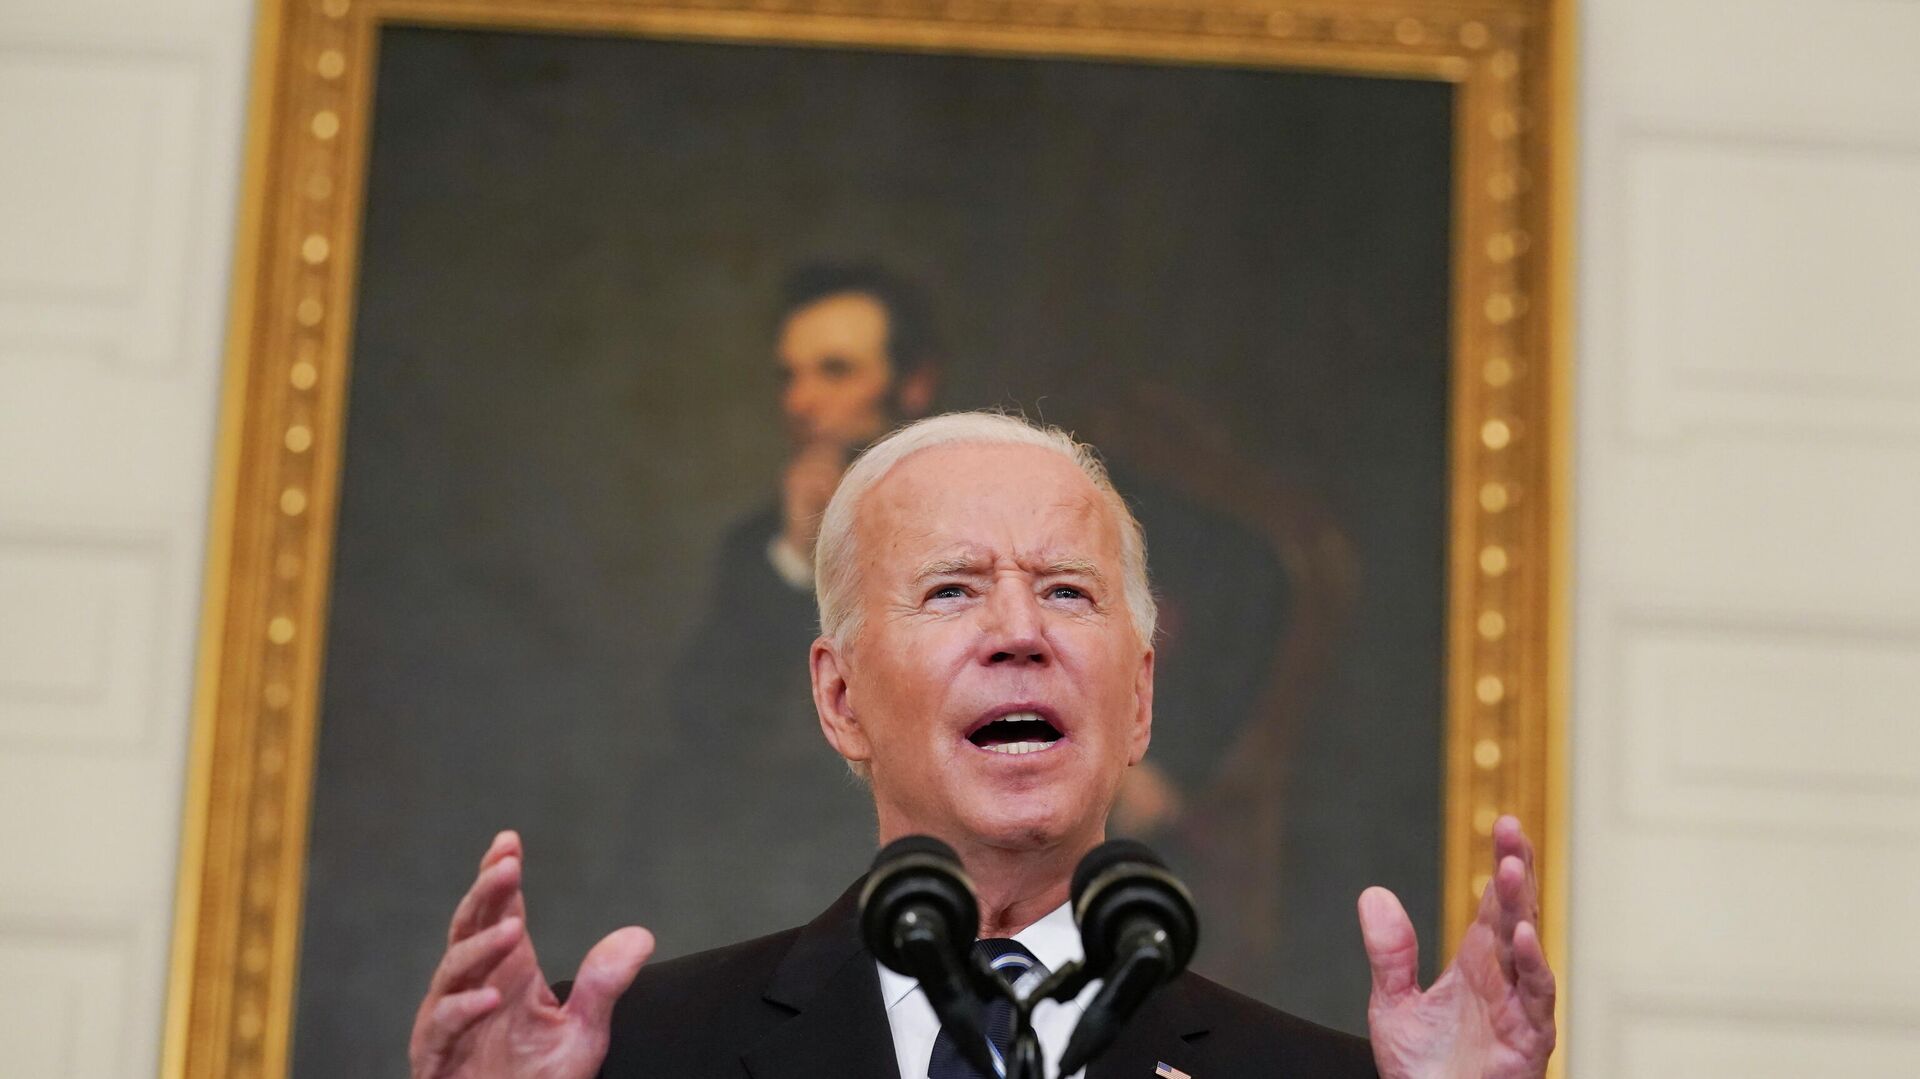 U.S. President Joe Biden delivers remarks on the Delta variant and his administration's efforts to increase vaccinations, from the State Dining Room of the White House in Washington, U.S., September 9, 2021. - Sputnik International, 1920, 09.09.2021